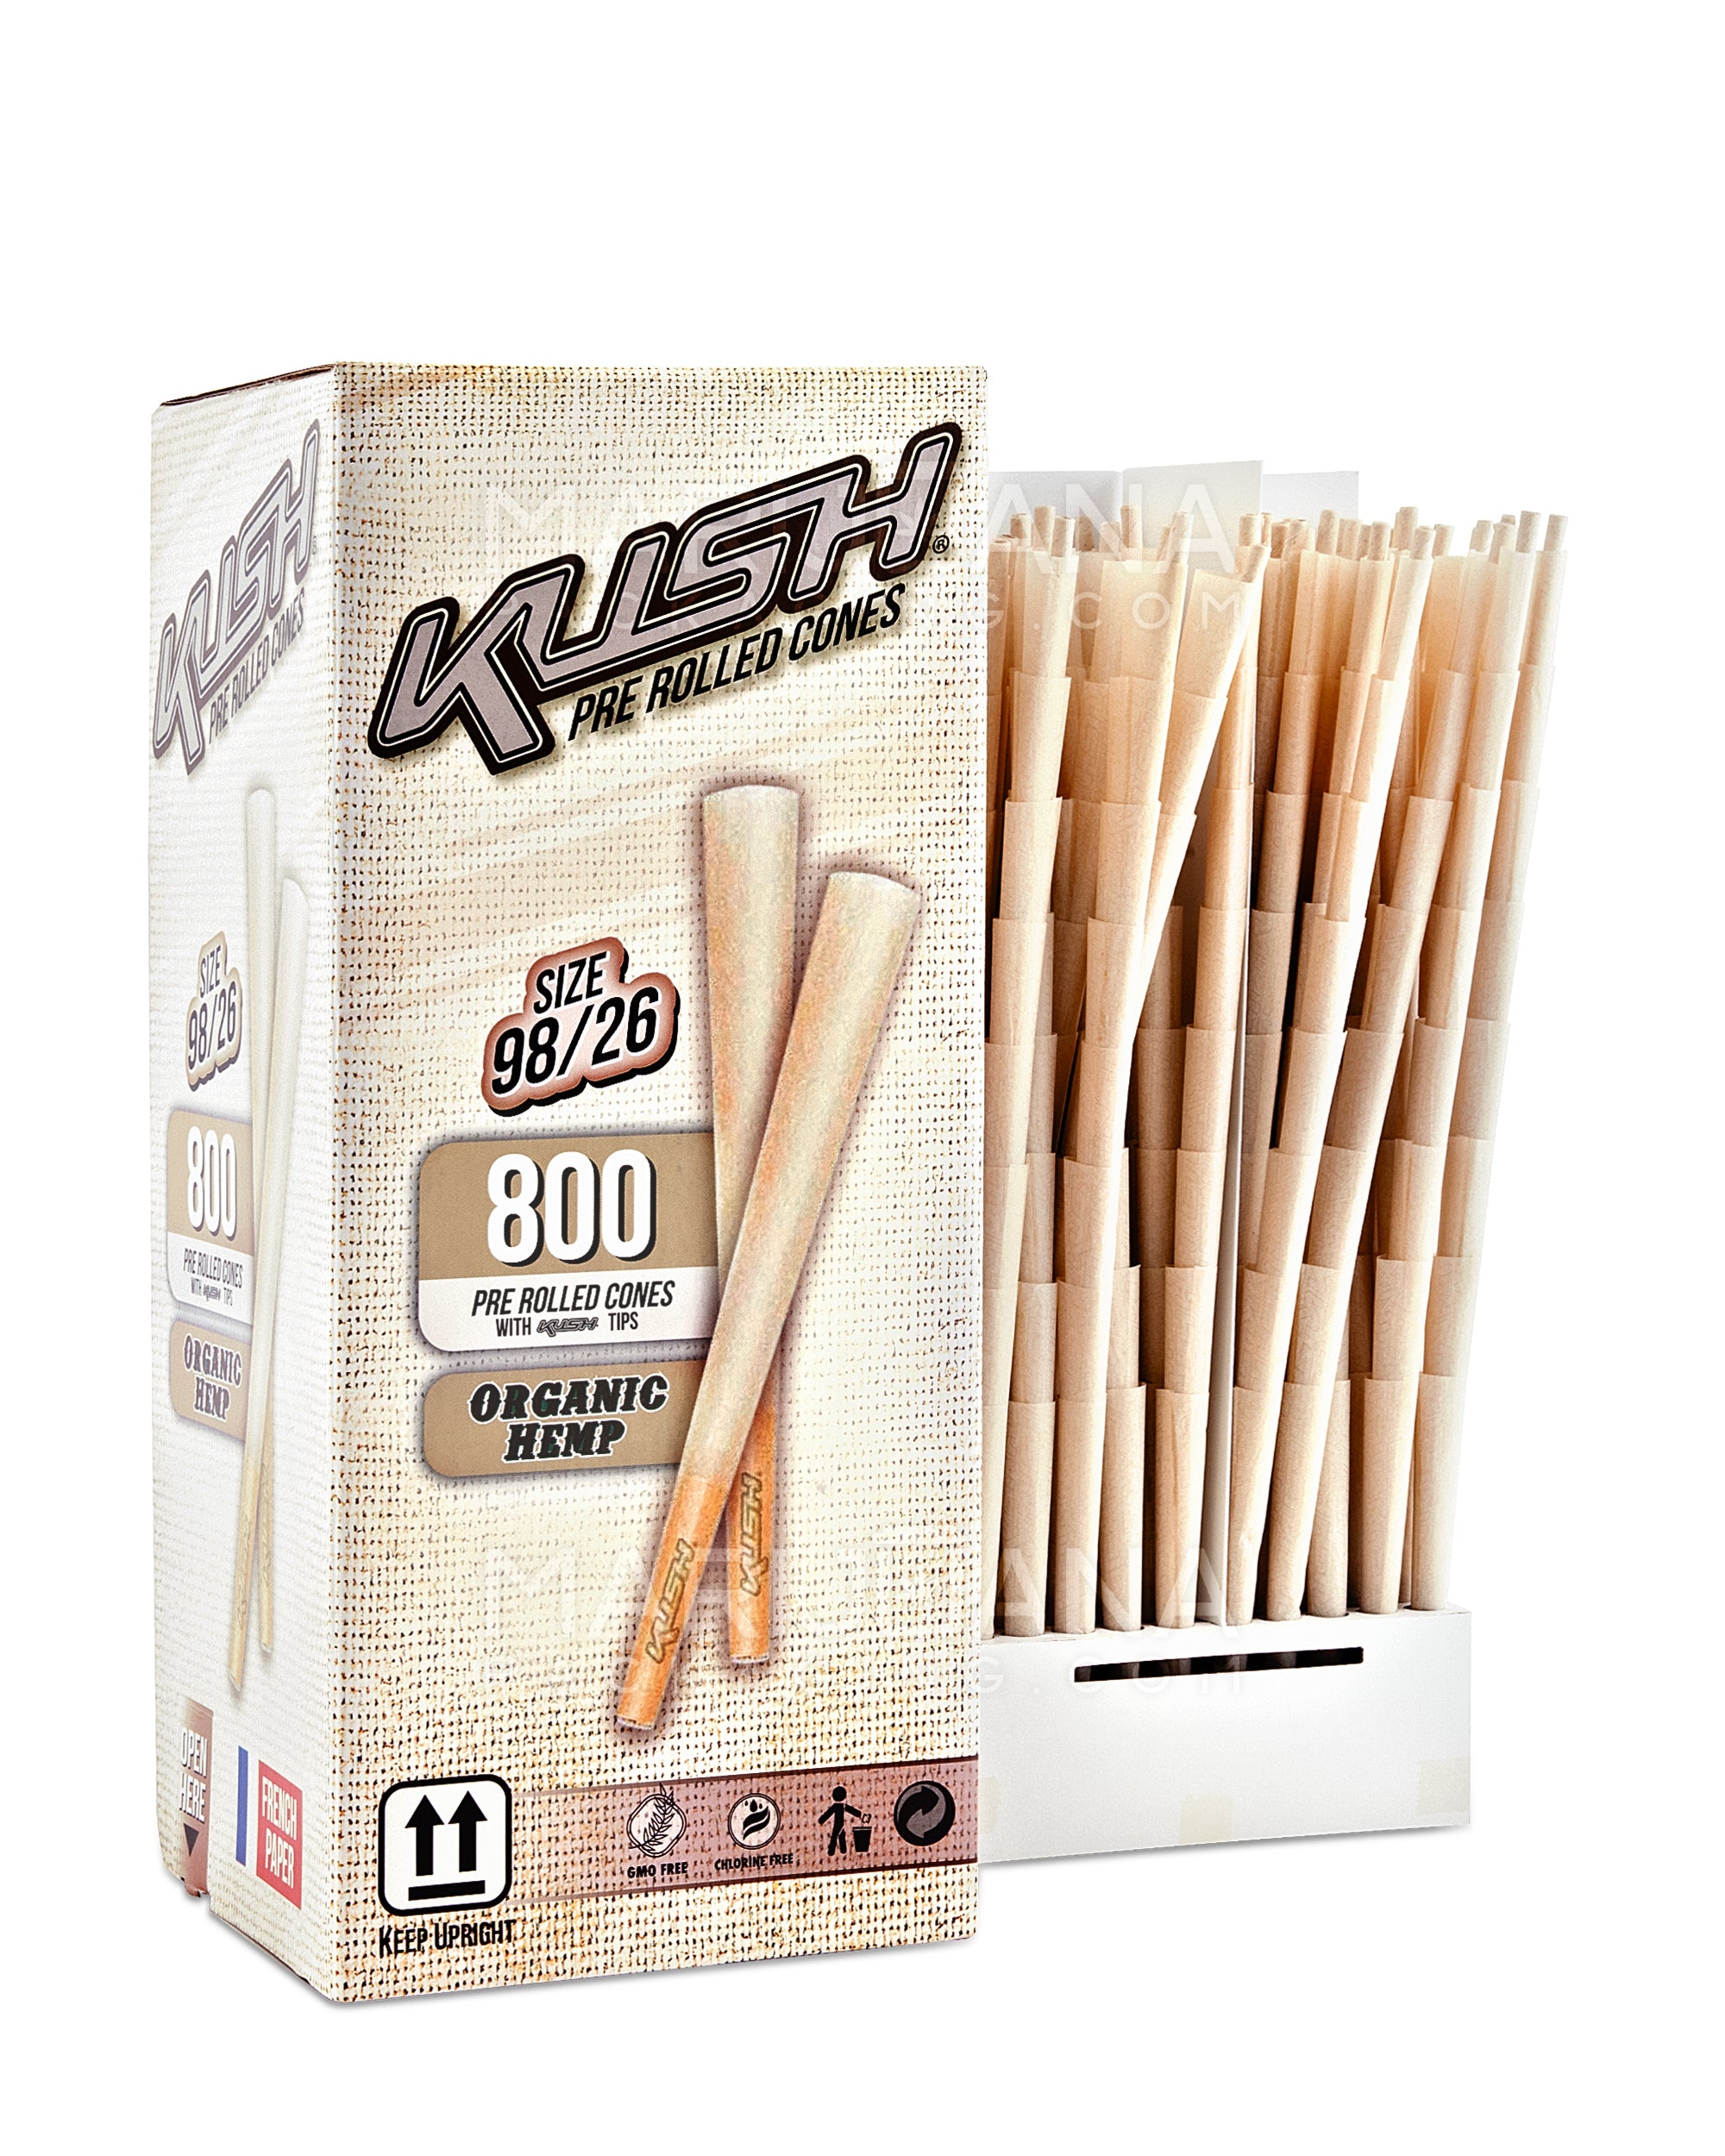 KUSH | Organic 98 Special Size Pre-Rolled Cones w/ Filter Tip | 98mm - Organic Hemp Paper - 800 Count - 2